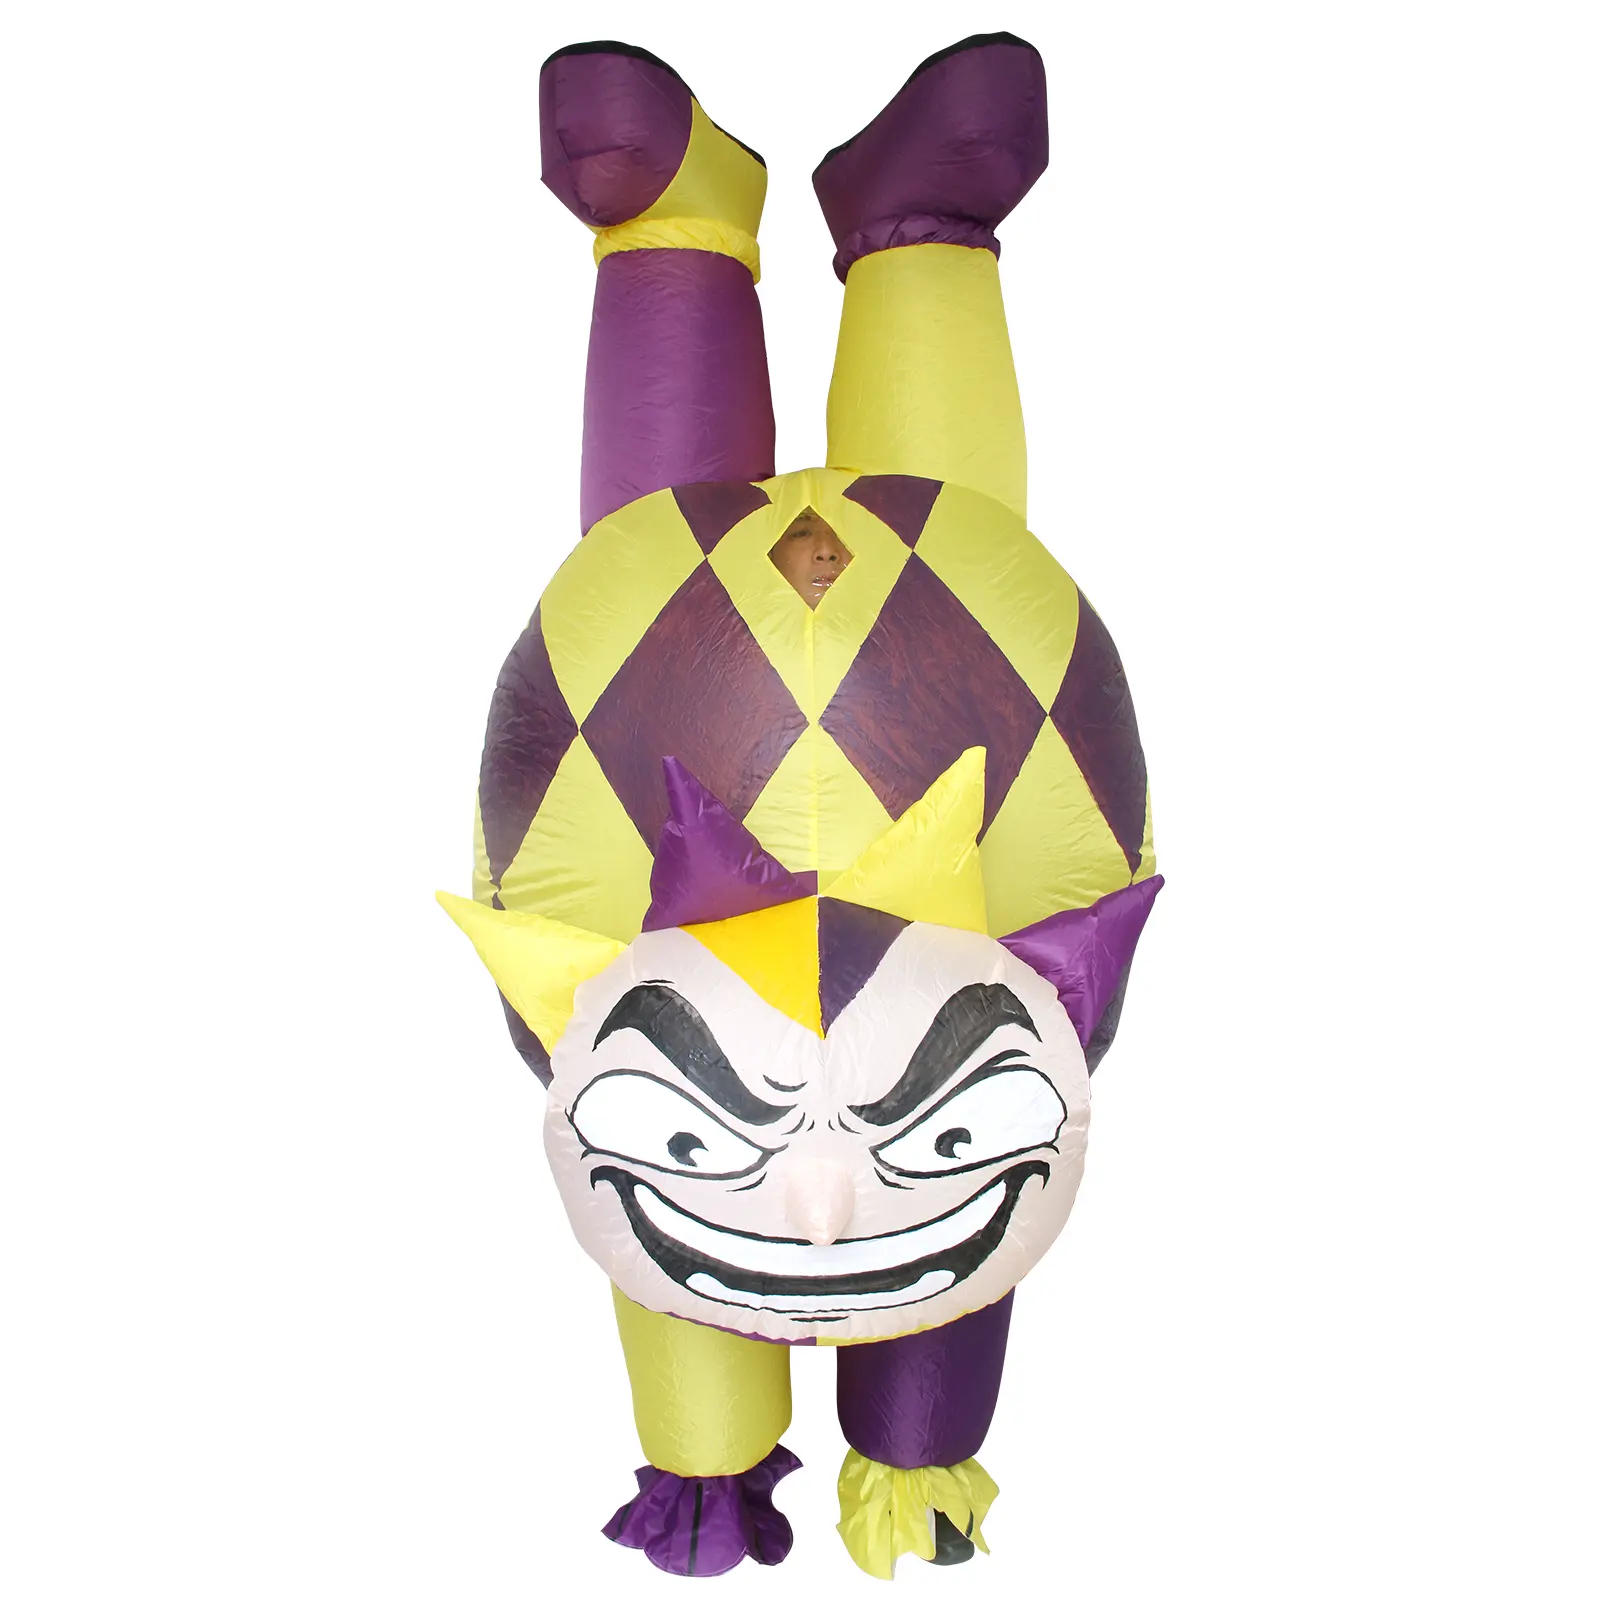 HUAYU New Design Comical Inflatable Costume Funny Handstand Clown Walking Blow Up Suit For Halloween Christmas Party